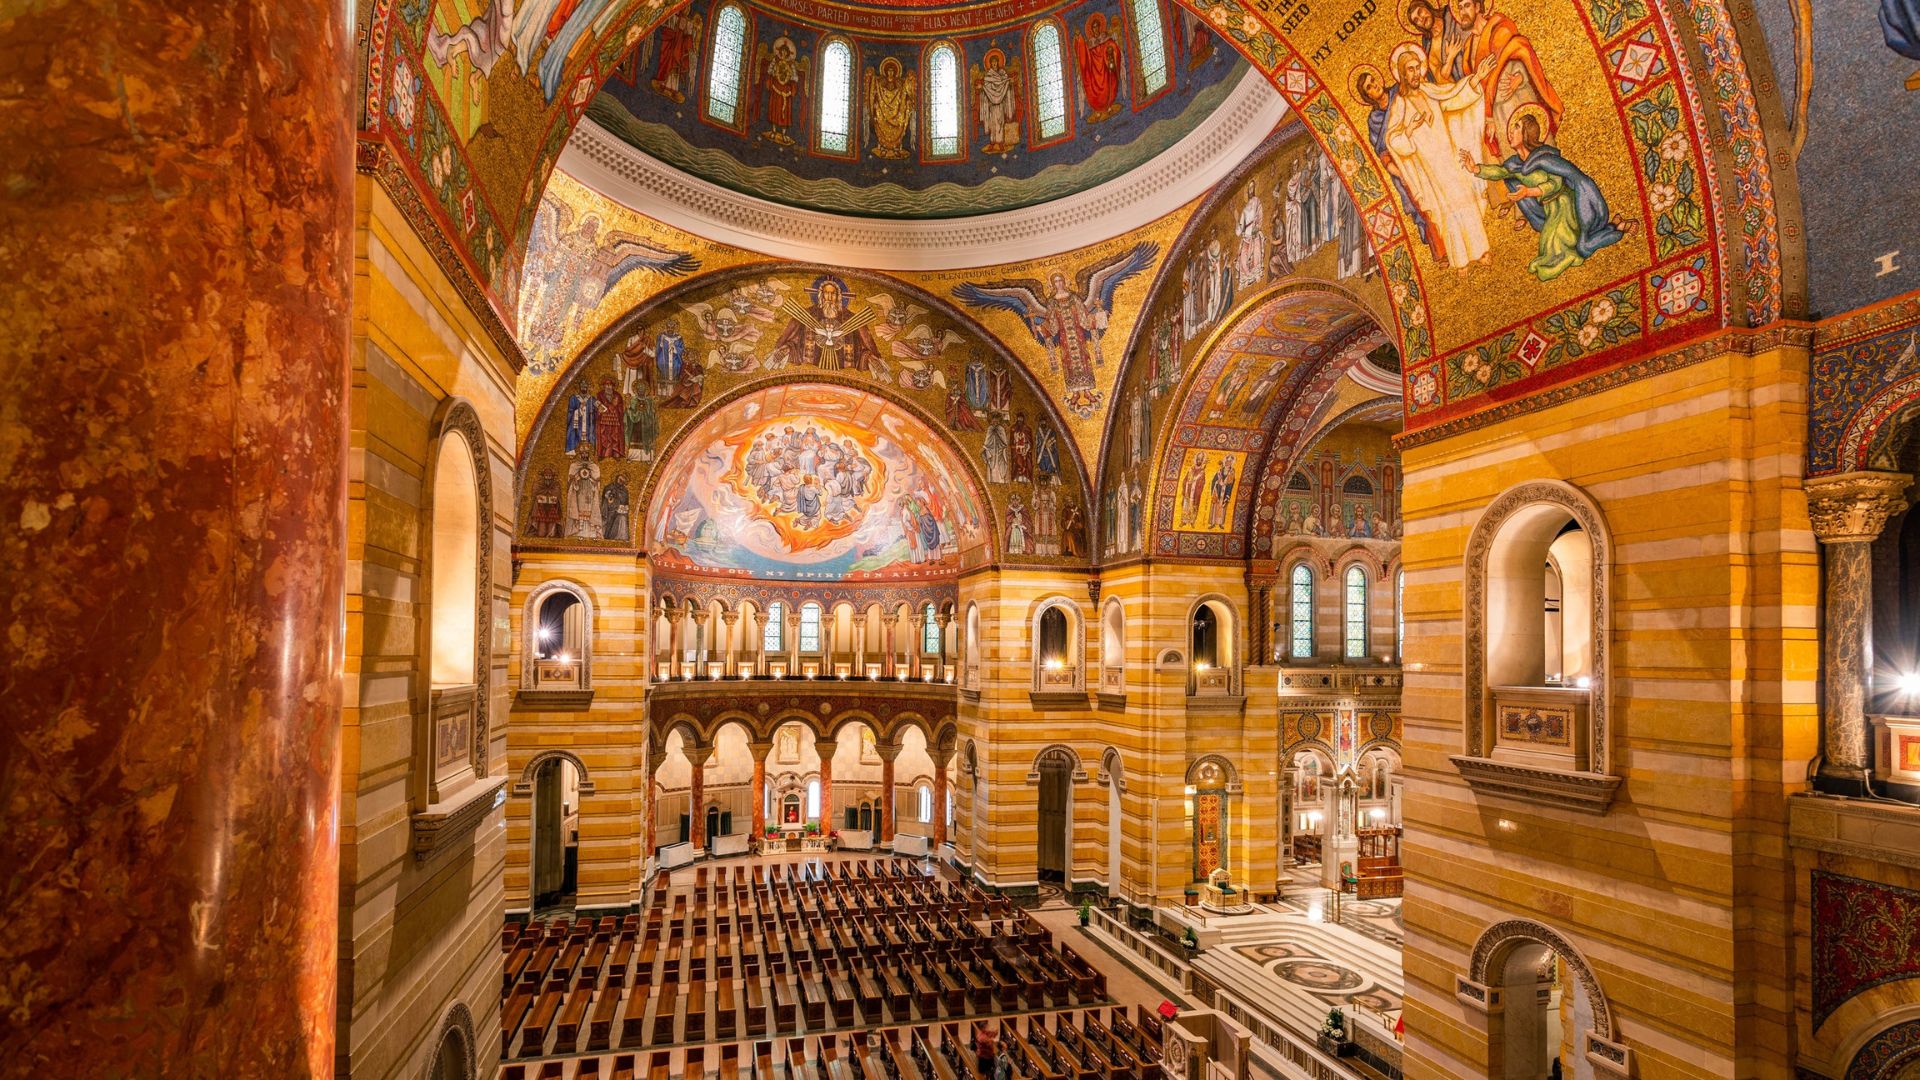 The Cathedral Basilica of Saint Louis is a distinguished work of art.